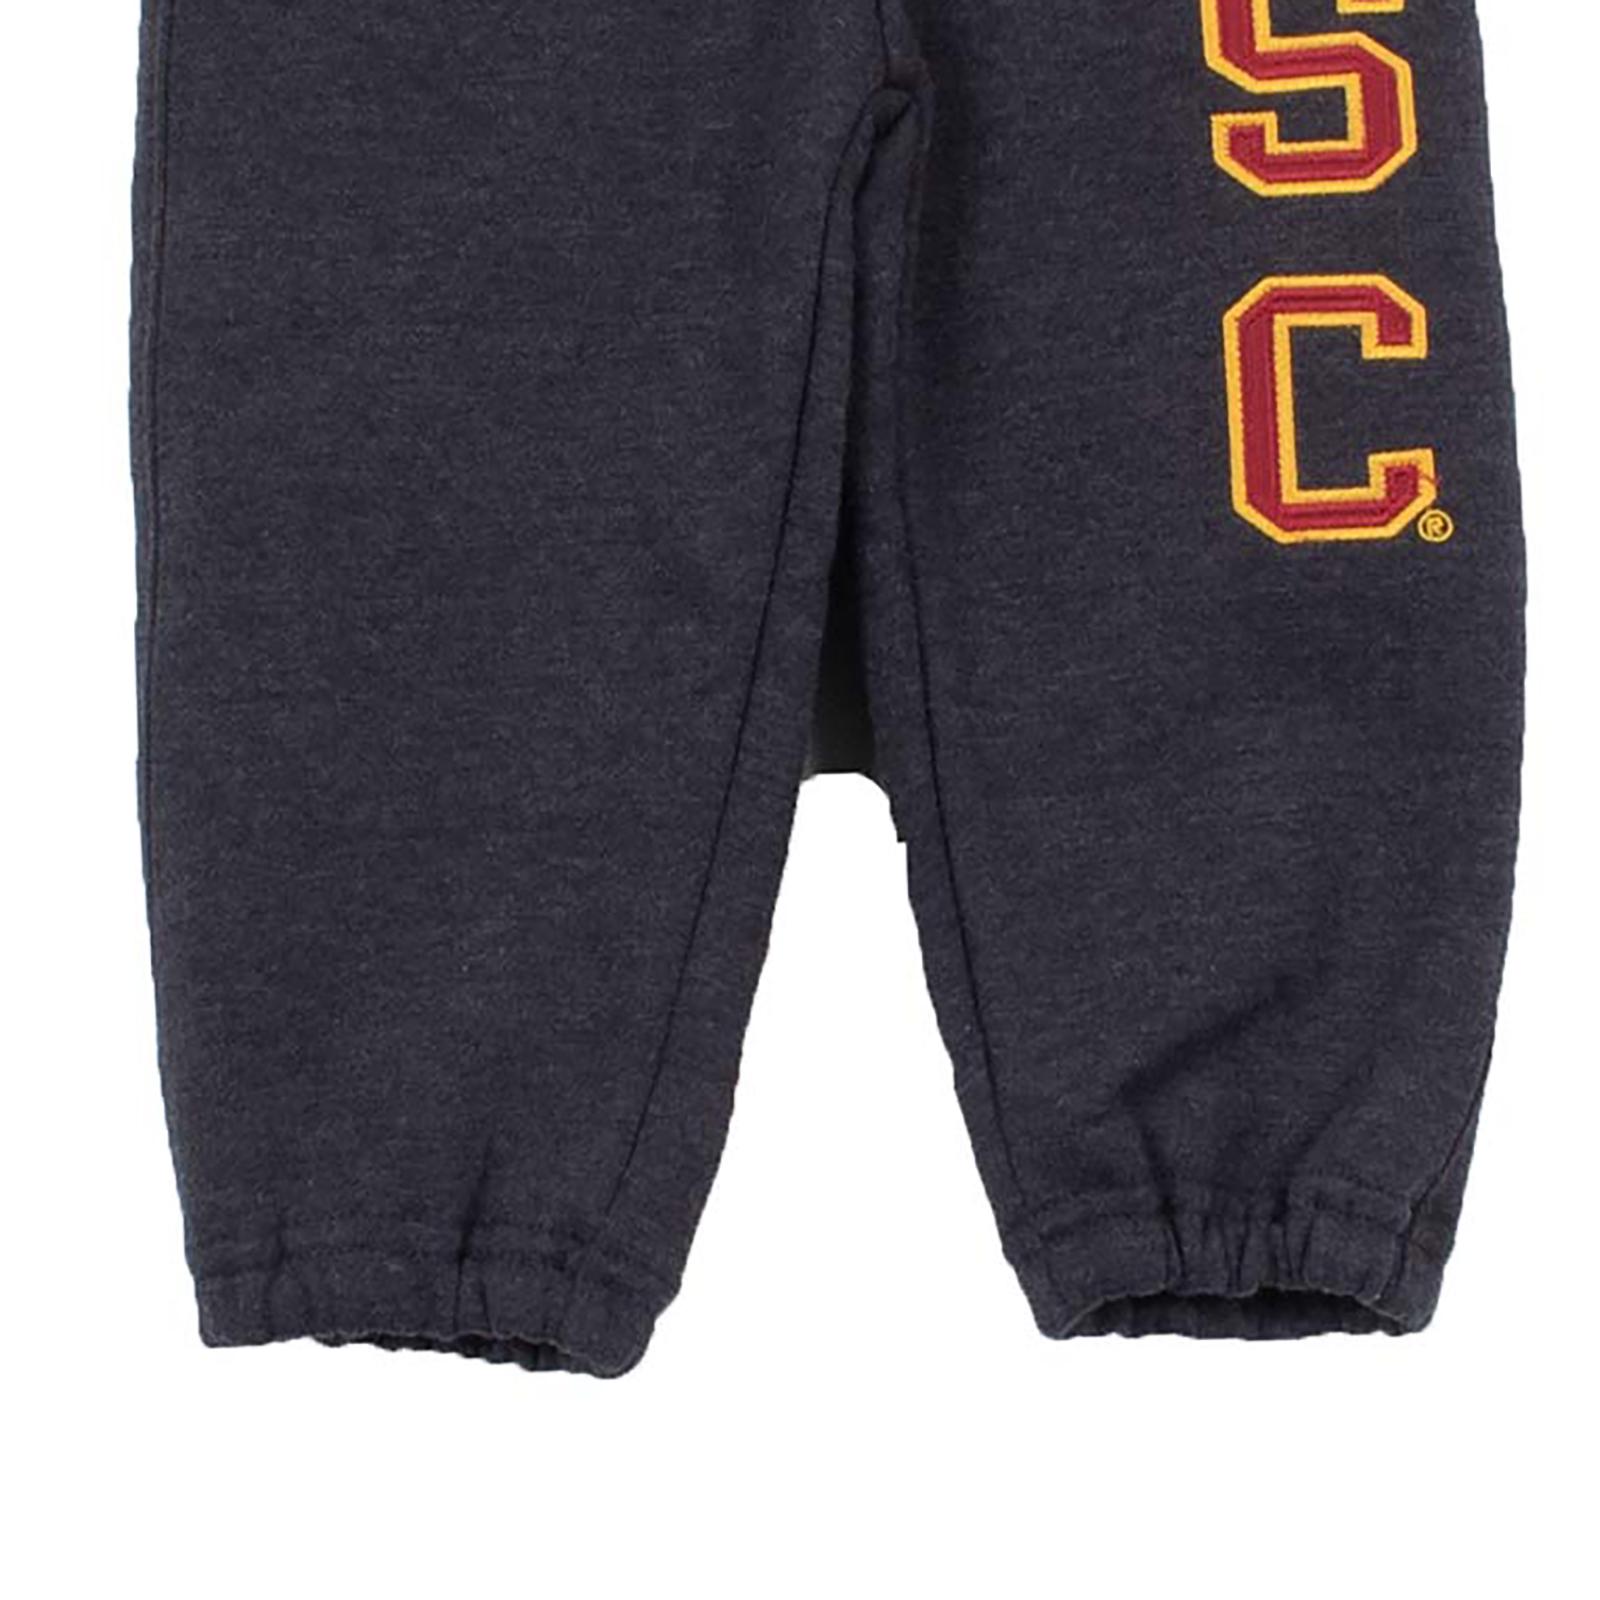 USC Arch Toddler TT Pant Oxford image31